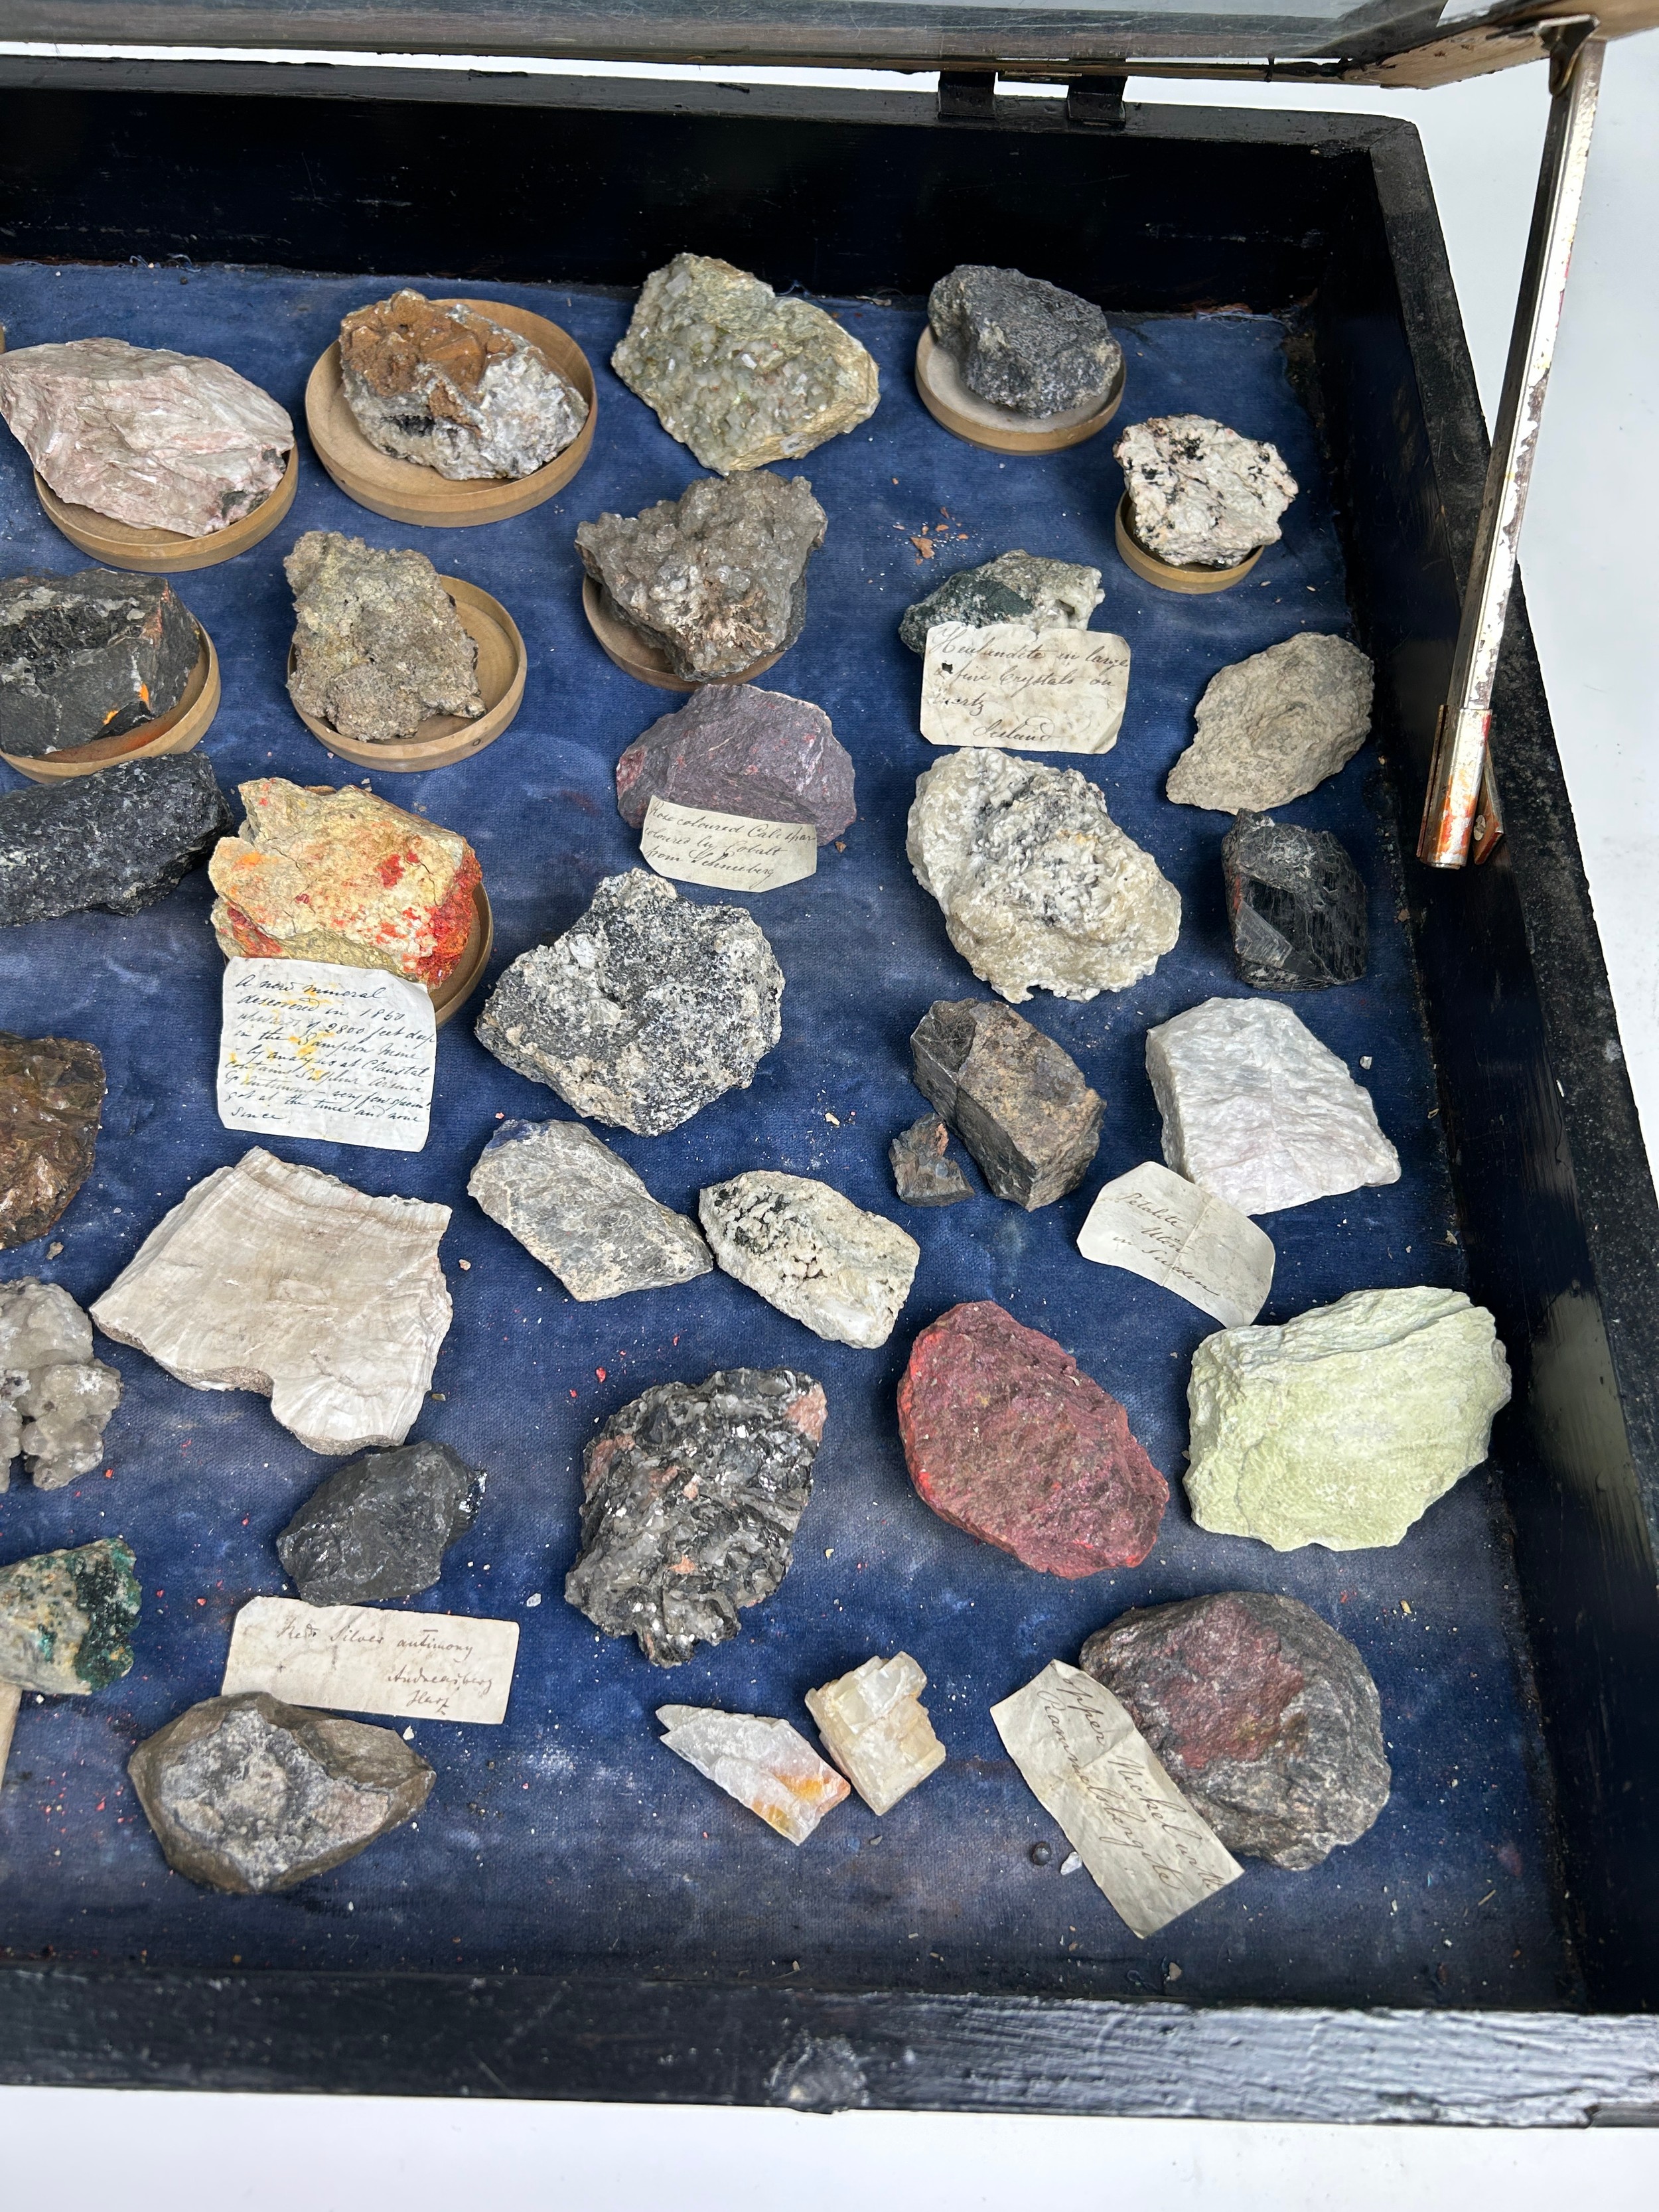 A RARE CABINET COLLECTION OF MINERALS CIRCA 1810-1860, including labels for some very important - Image 18 of 30